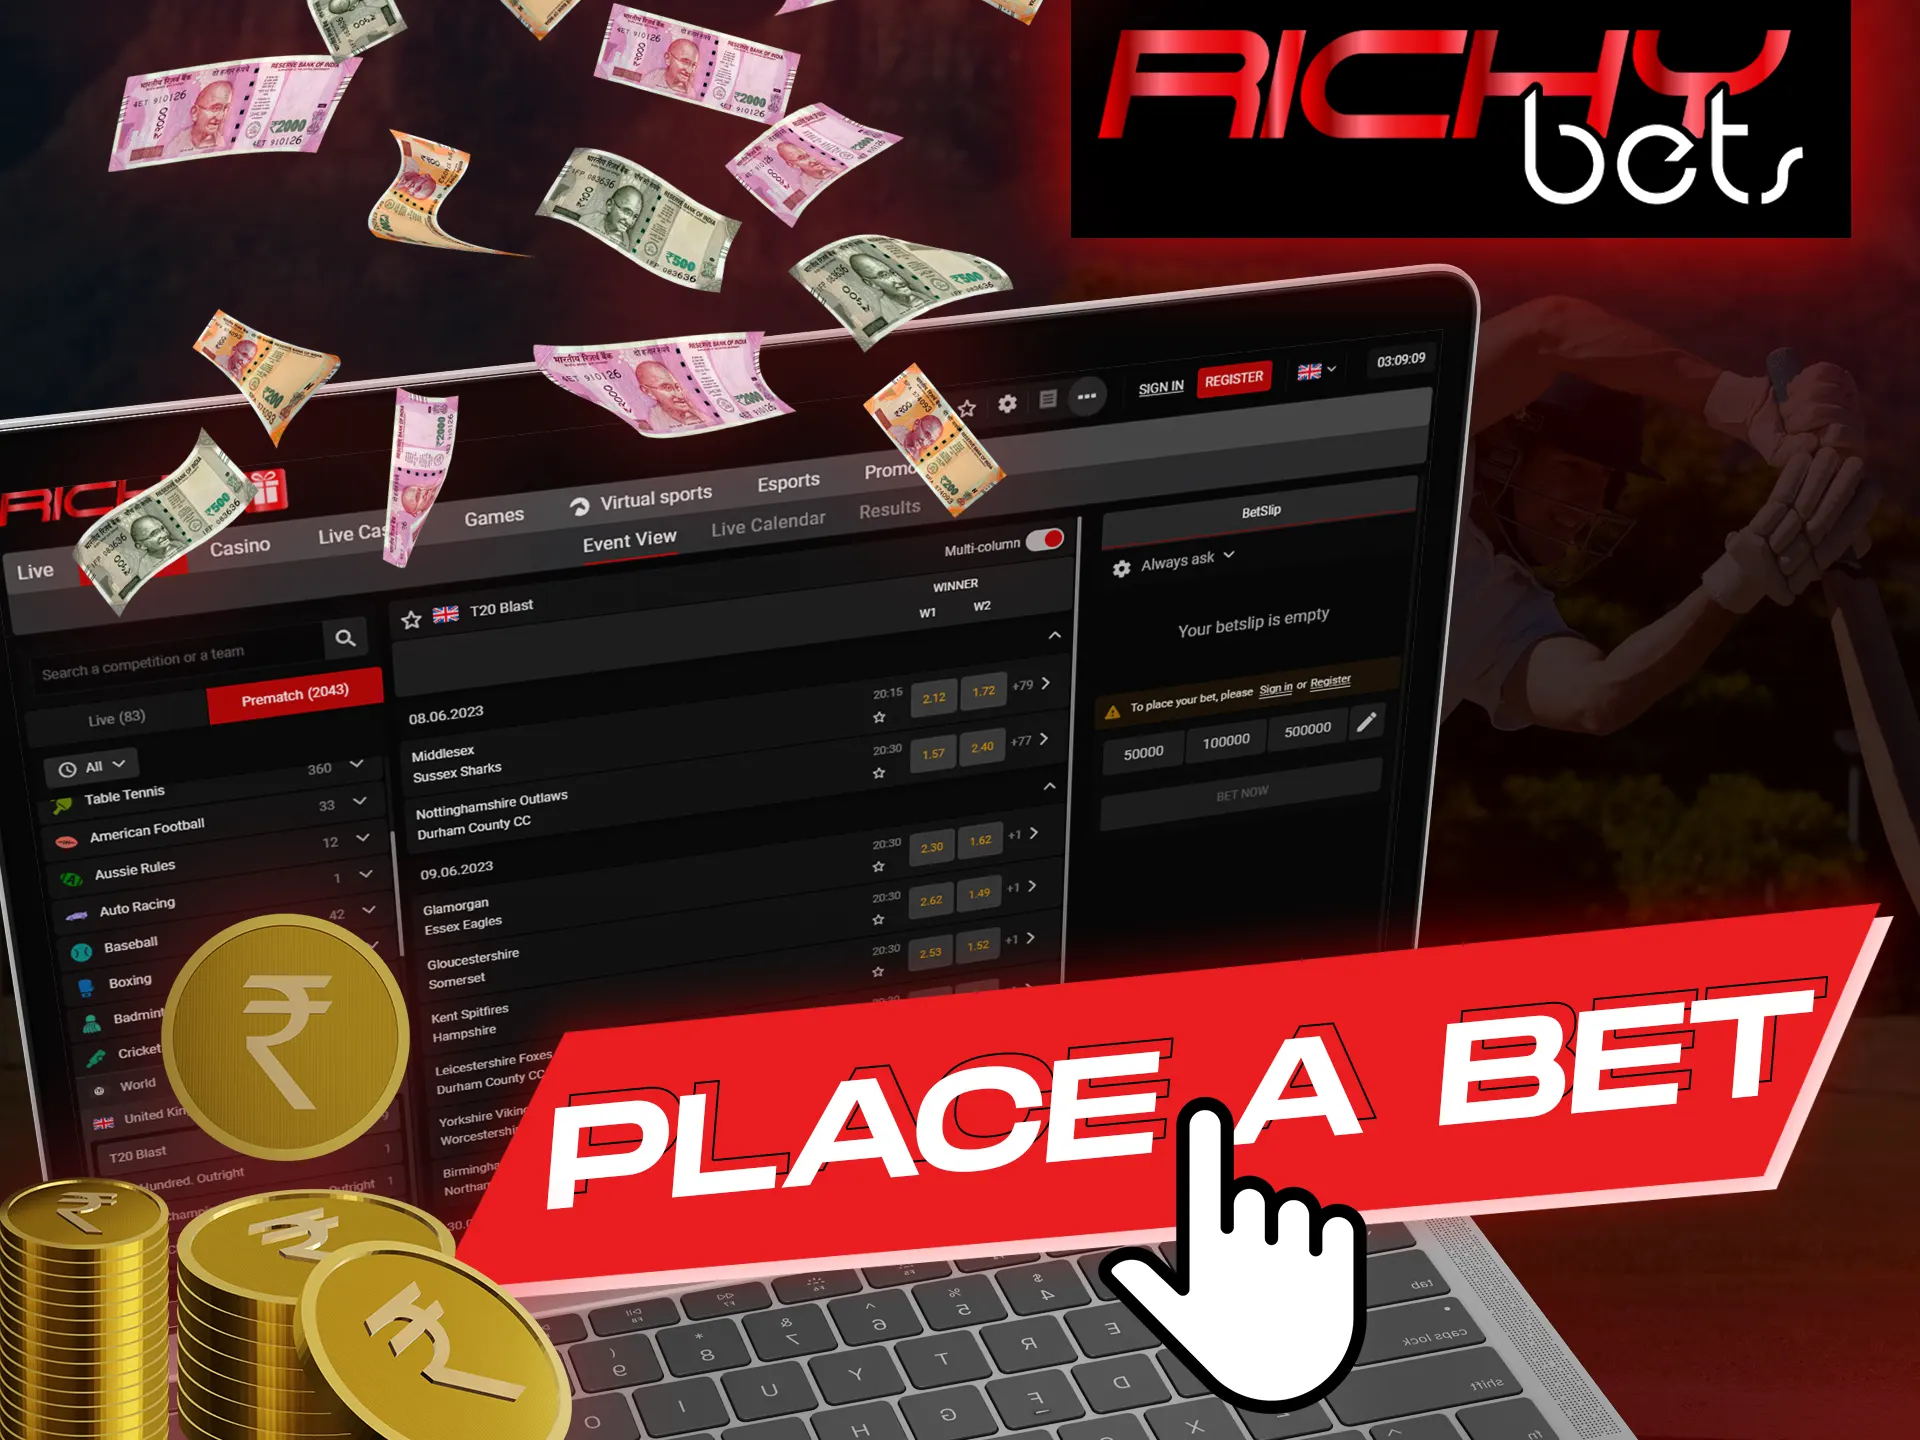 Make a new bet at the Richybets in one click.